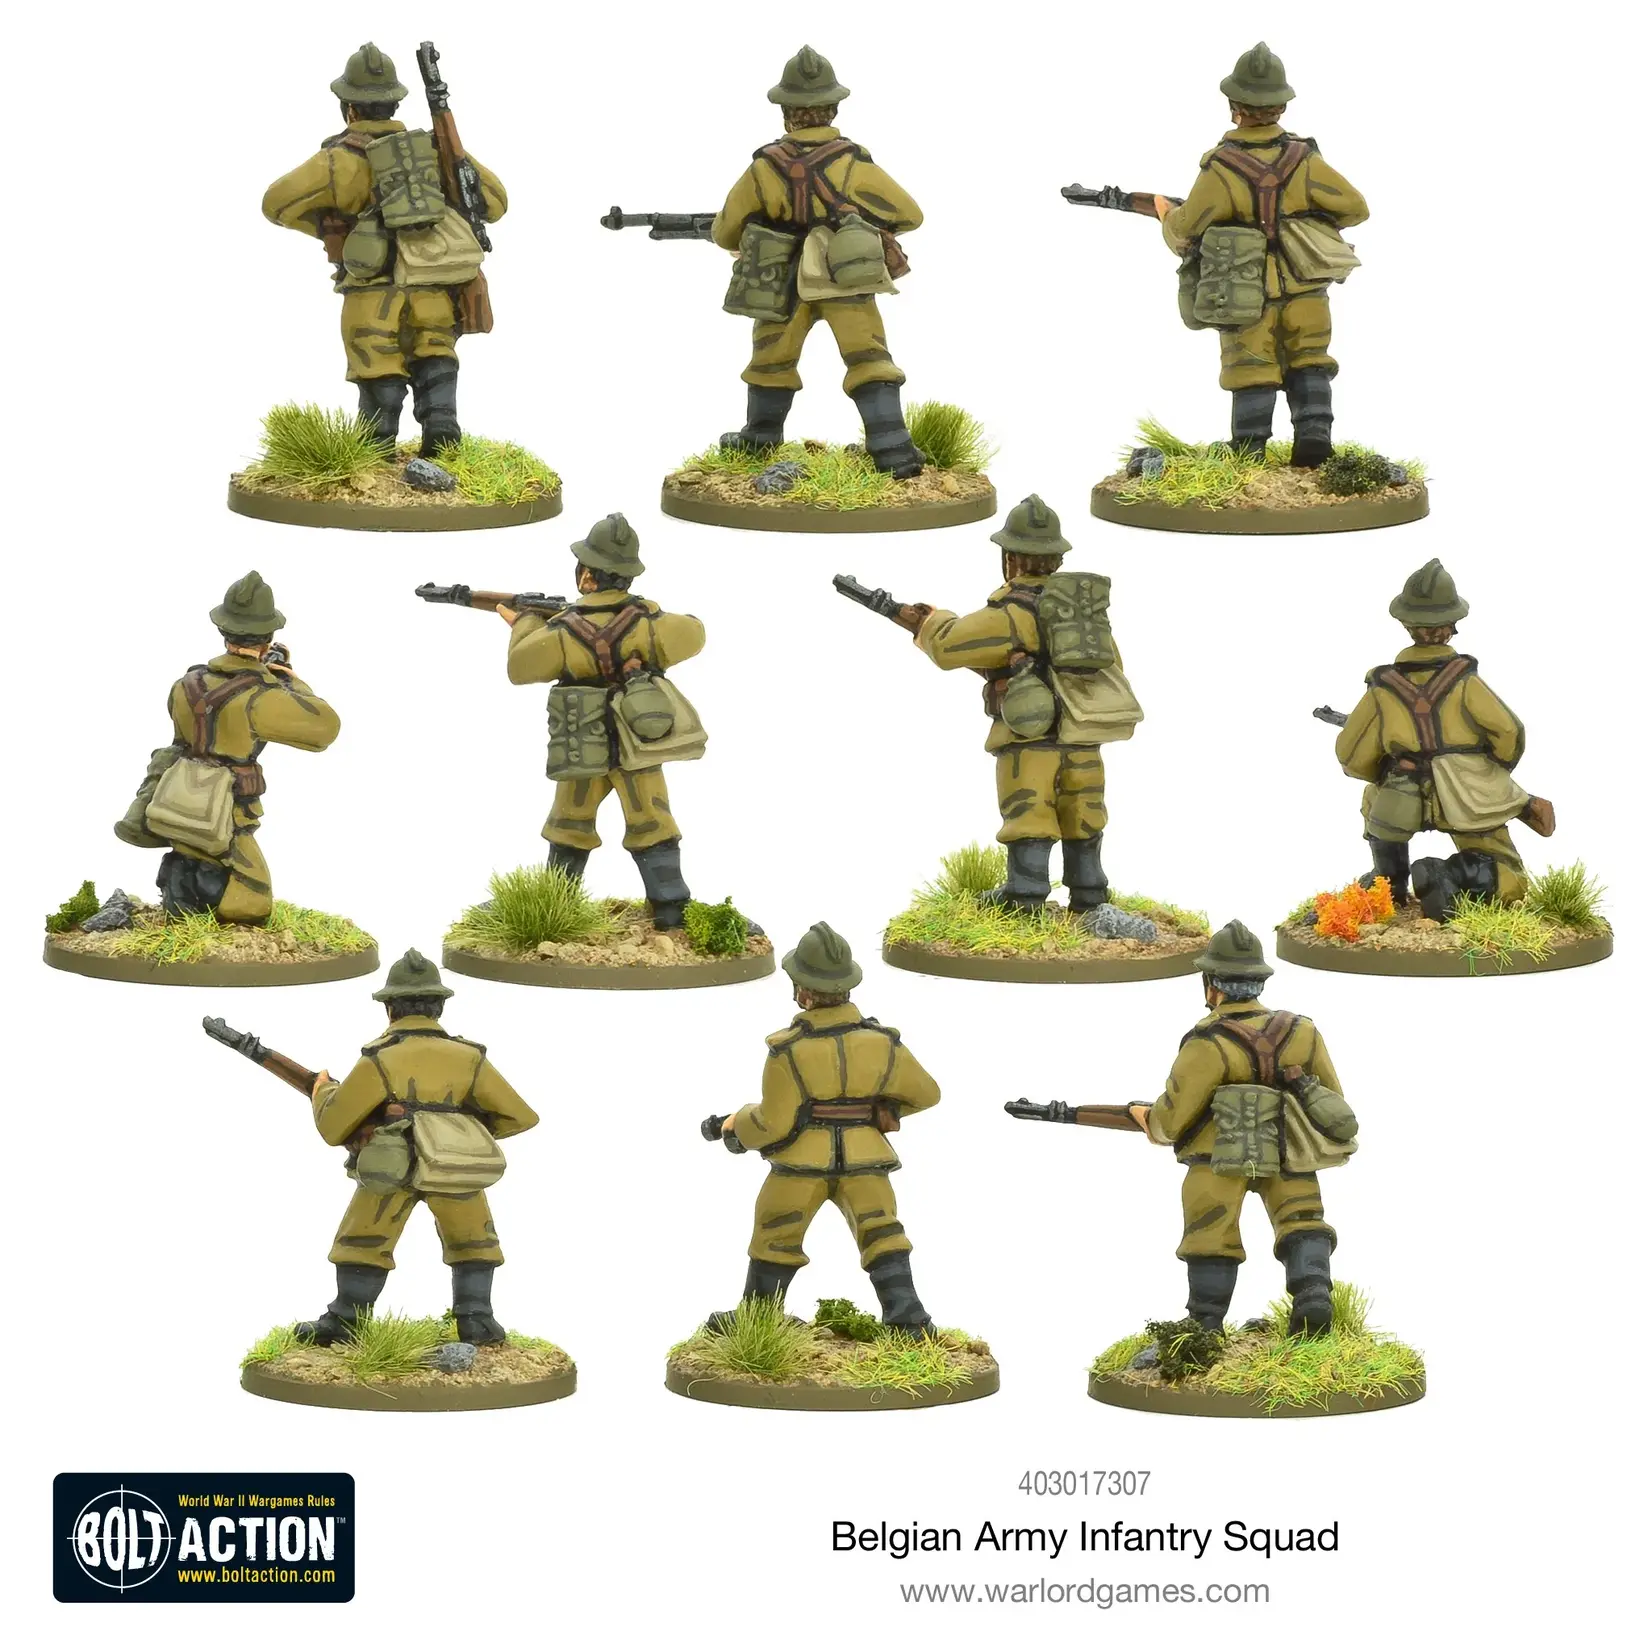 Belgian army infantry squad - Bolt action